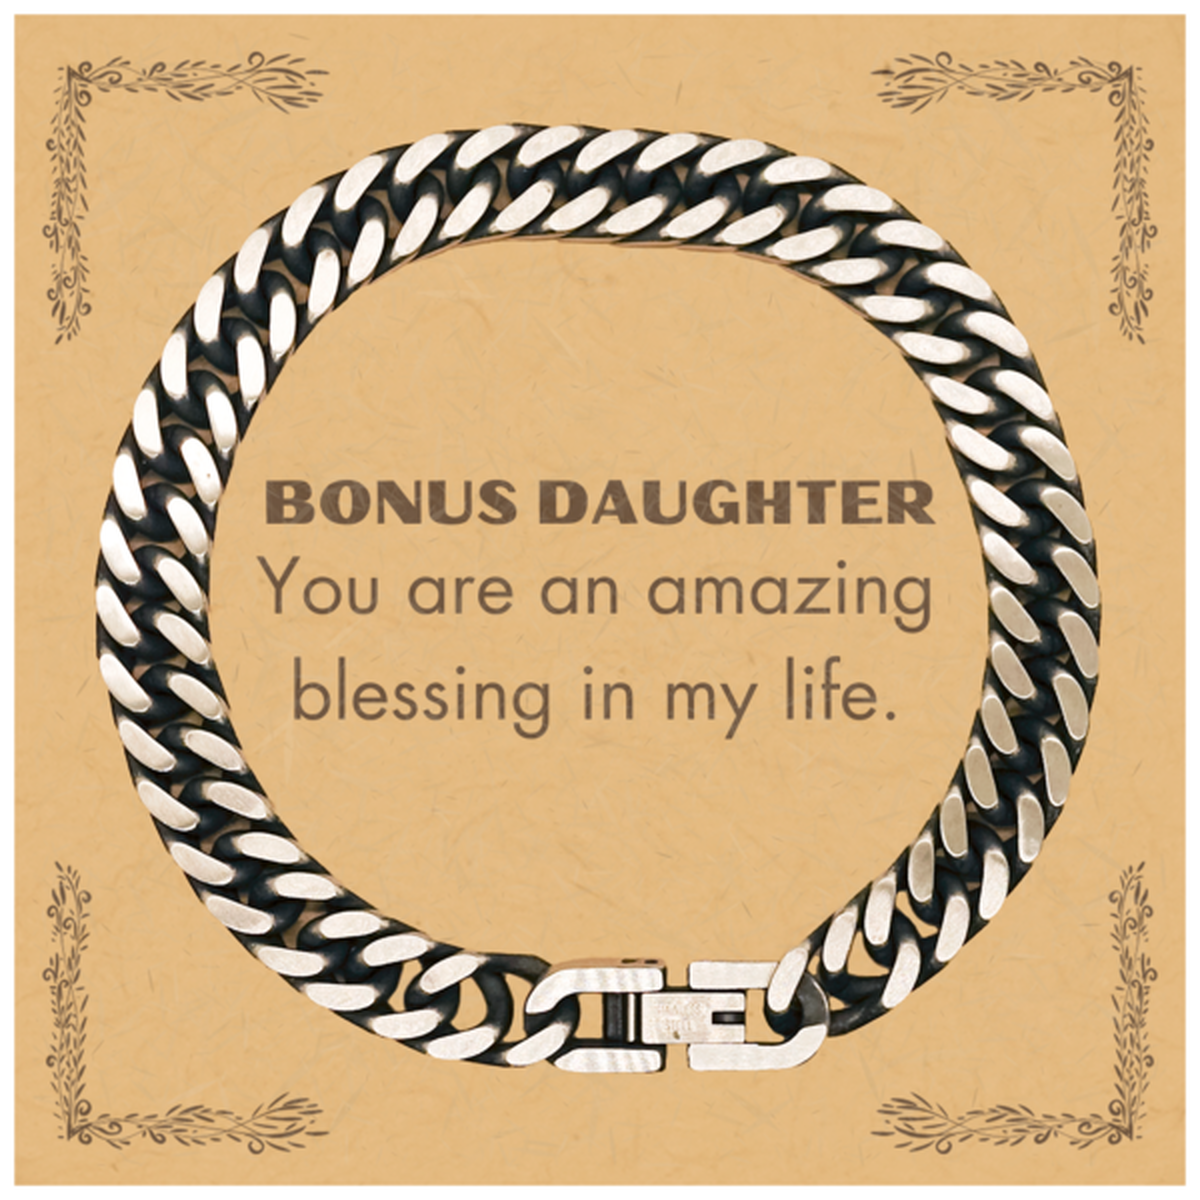 Bonus Daughter Cuban Link Chain Bracelet, You are an amazing blessing in my life, Thank You Gifts For Bonus Daughter, Inspirational Birthday Christmas Unique Gifts For Bonus Daughter